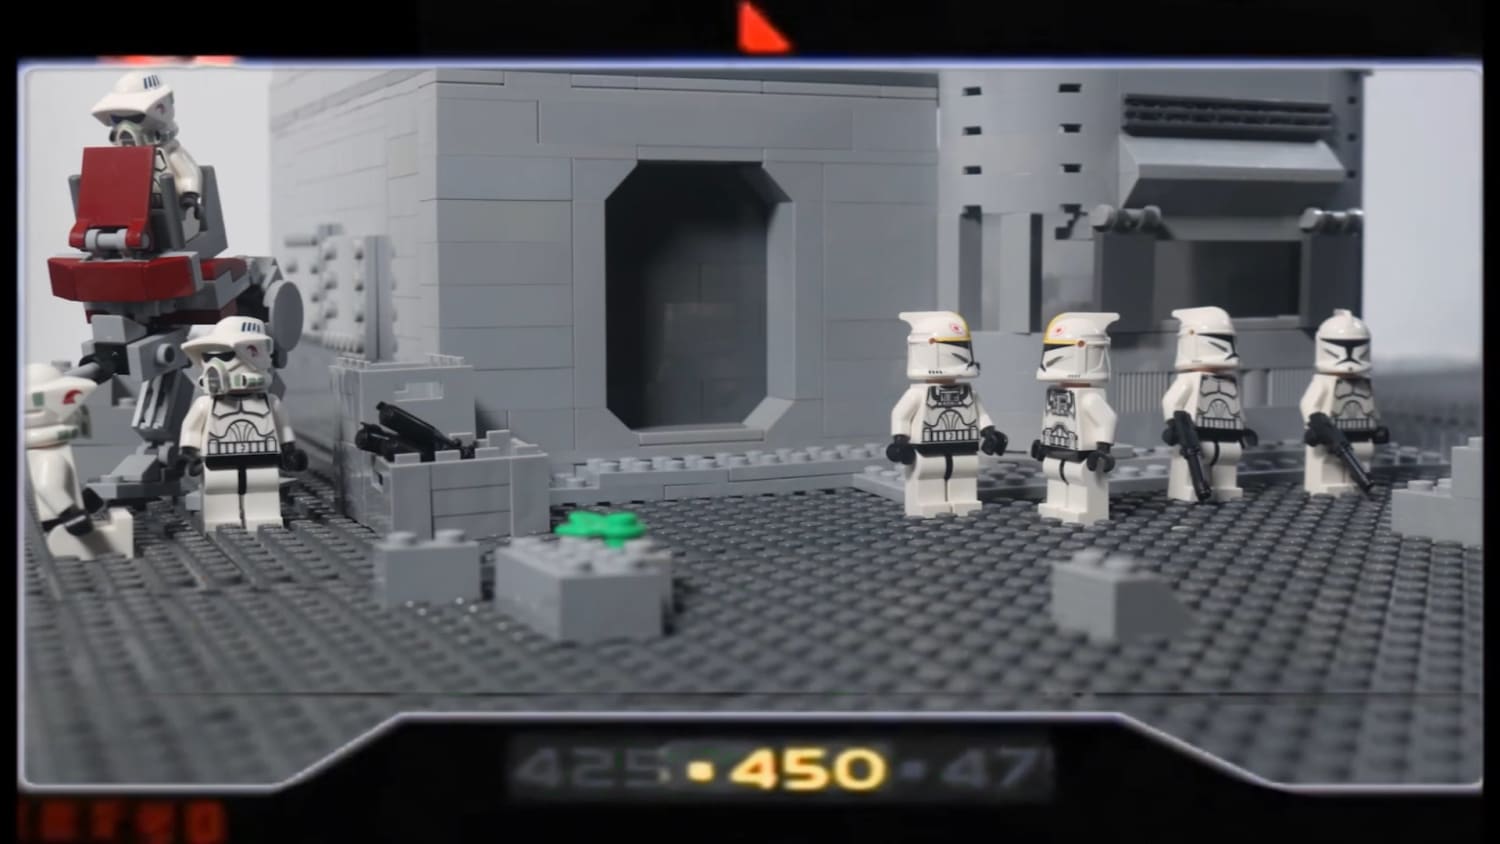 I recreated the first mission in Battlefront 2 2005, but in lego stopmotion.